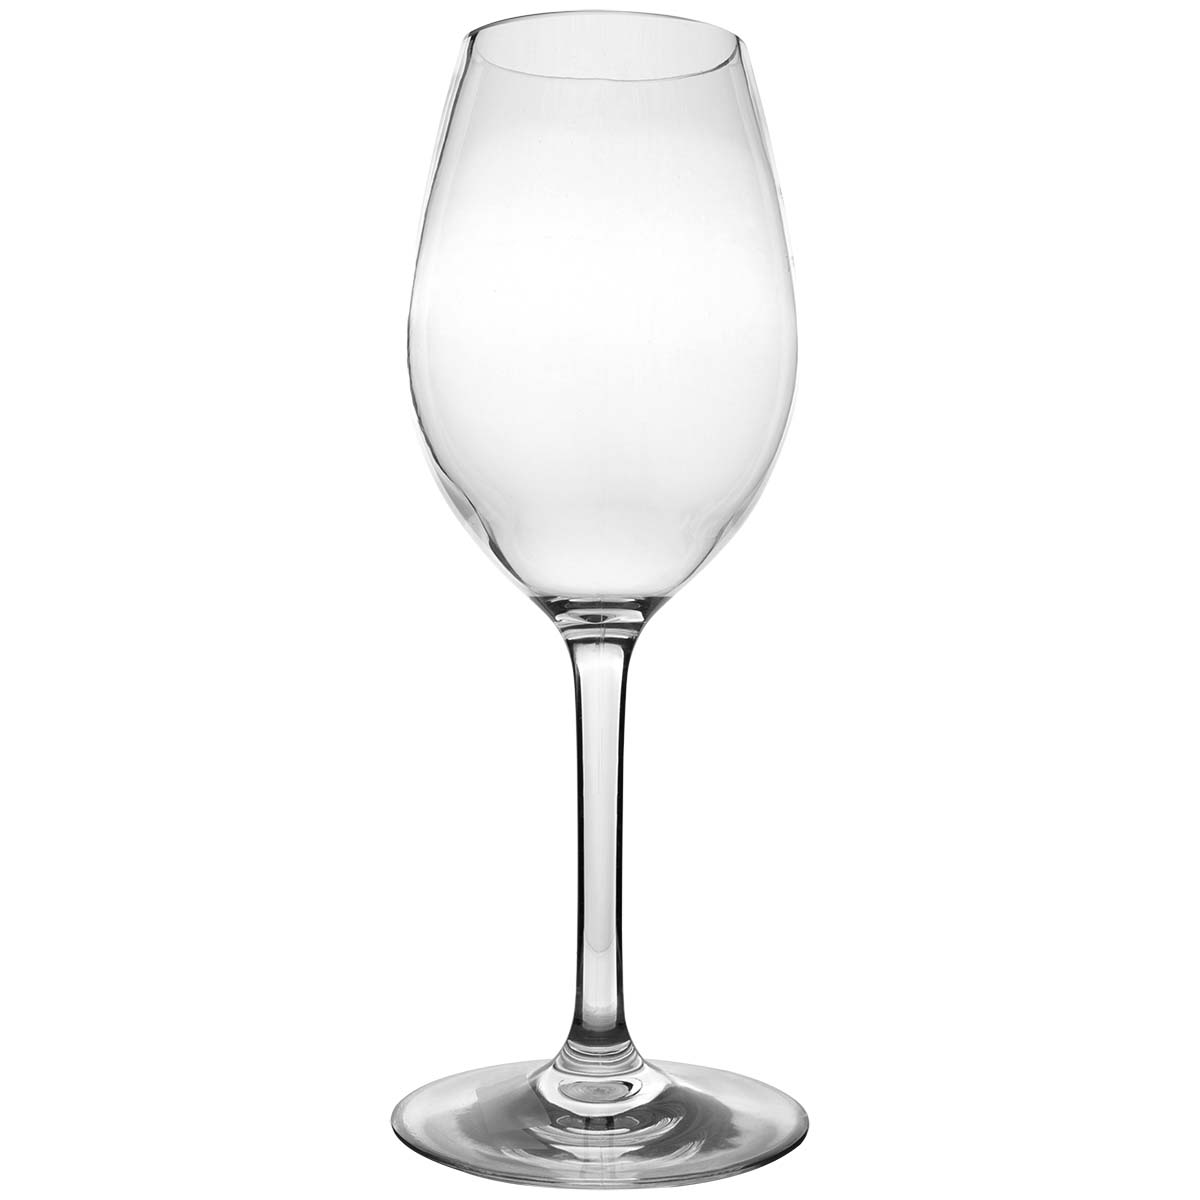 6101460 An extra sturdy and luxurious set of white wine glasses. Made of 100% tritan This makes the glasses almost unbreakable, light weight and scratch proof. This glass is also dishwasher safe. The glass is BPA free.